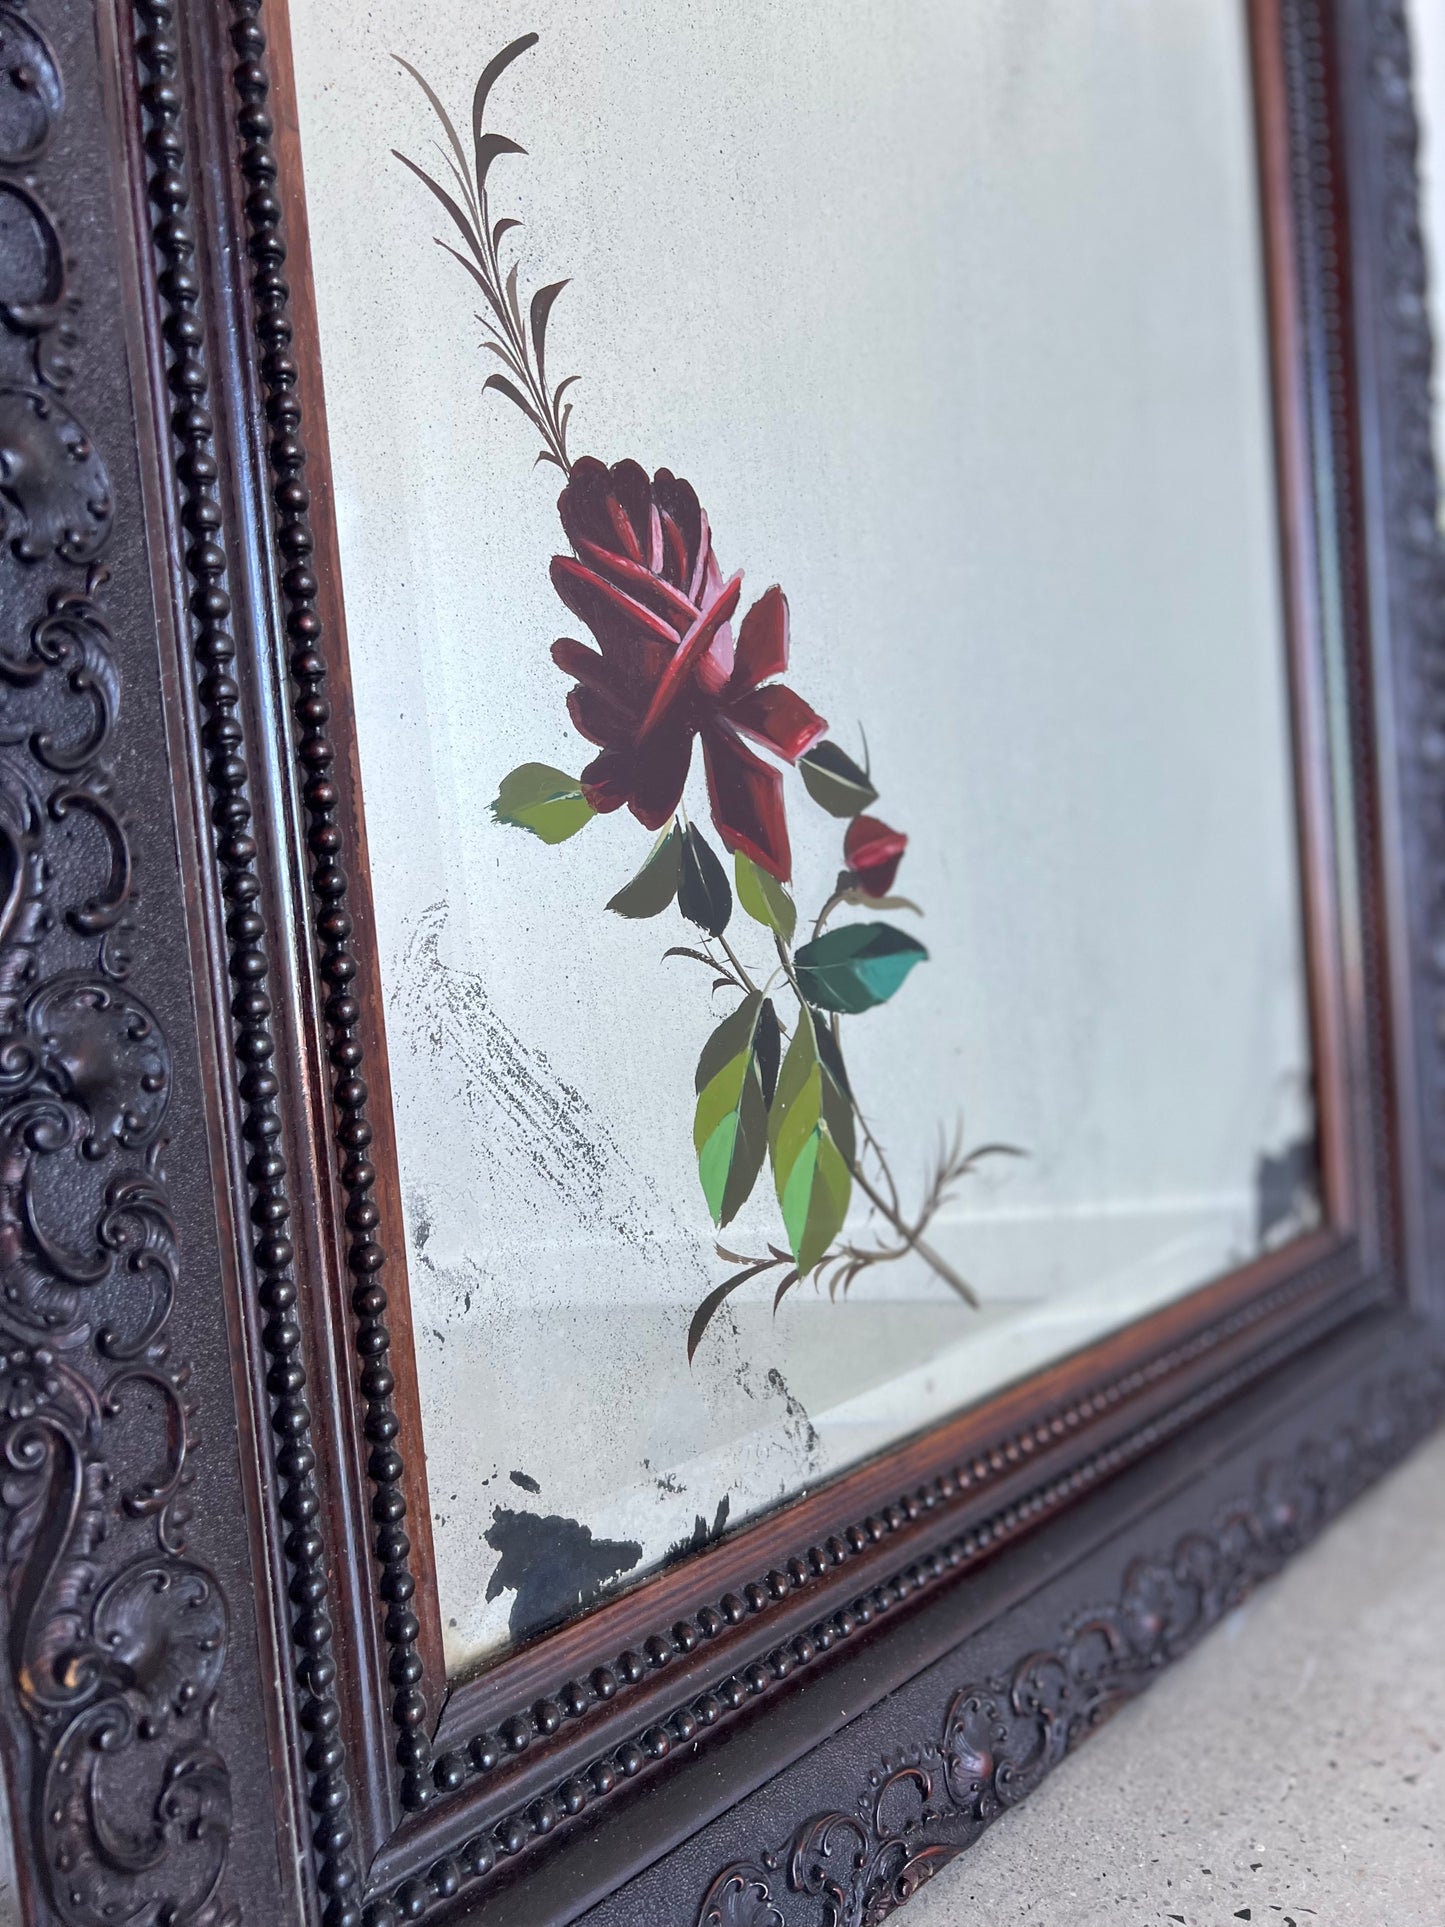 Italian Rectangular Walnut Wall Mirror with Curved Frame and Flowers art work, 1950s